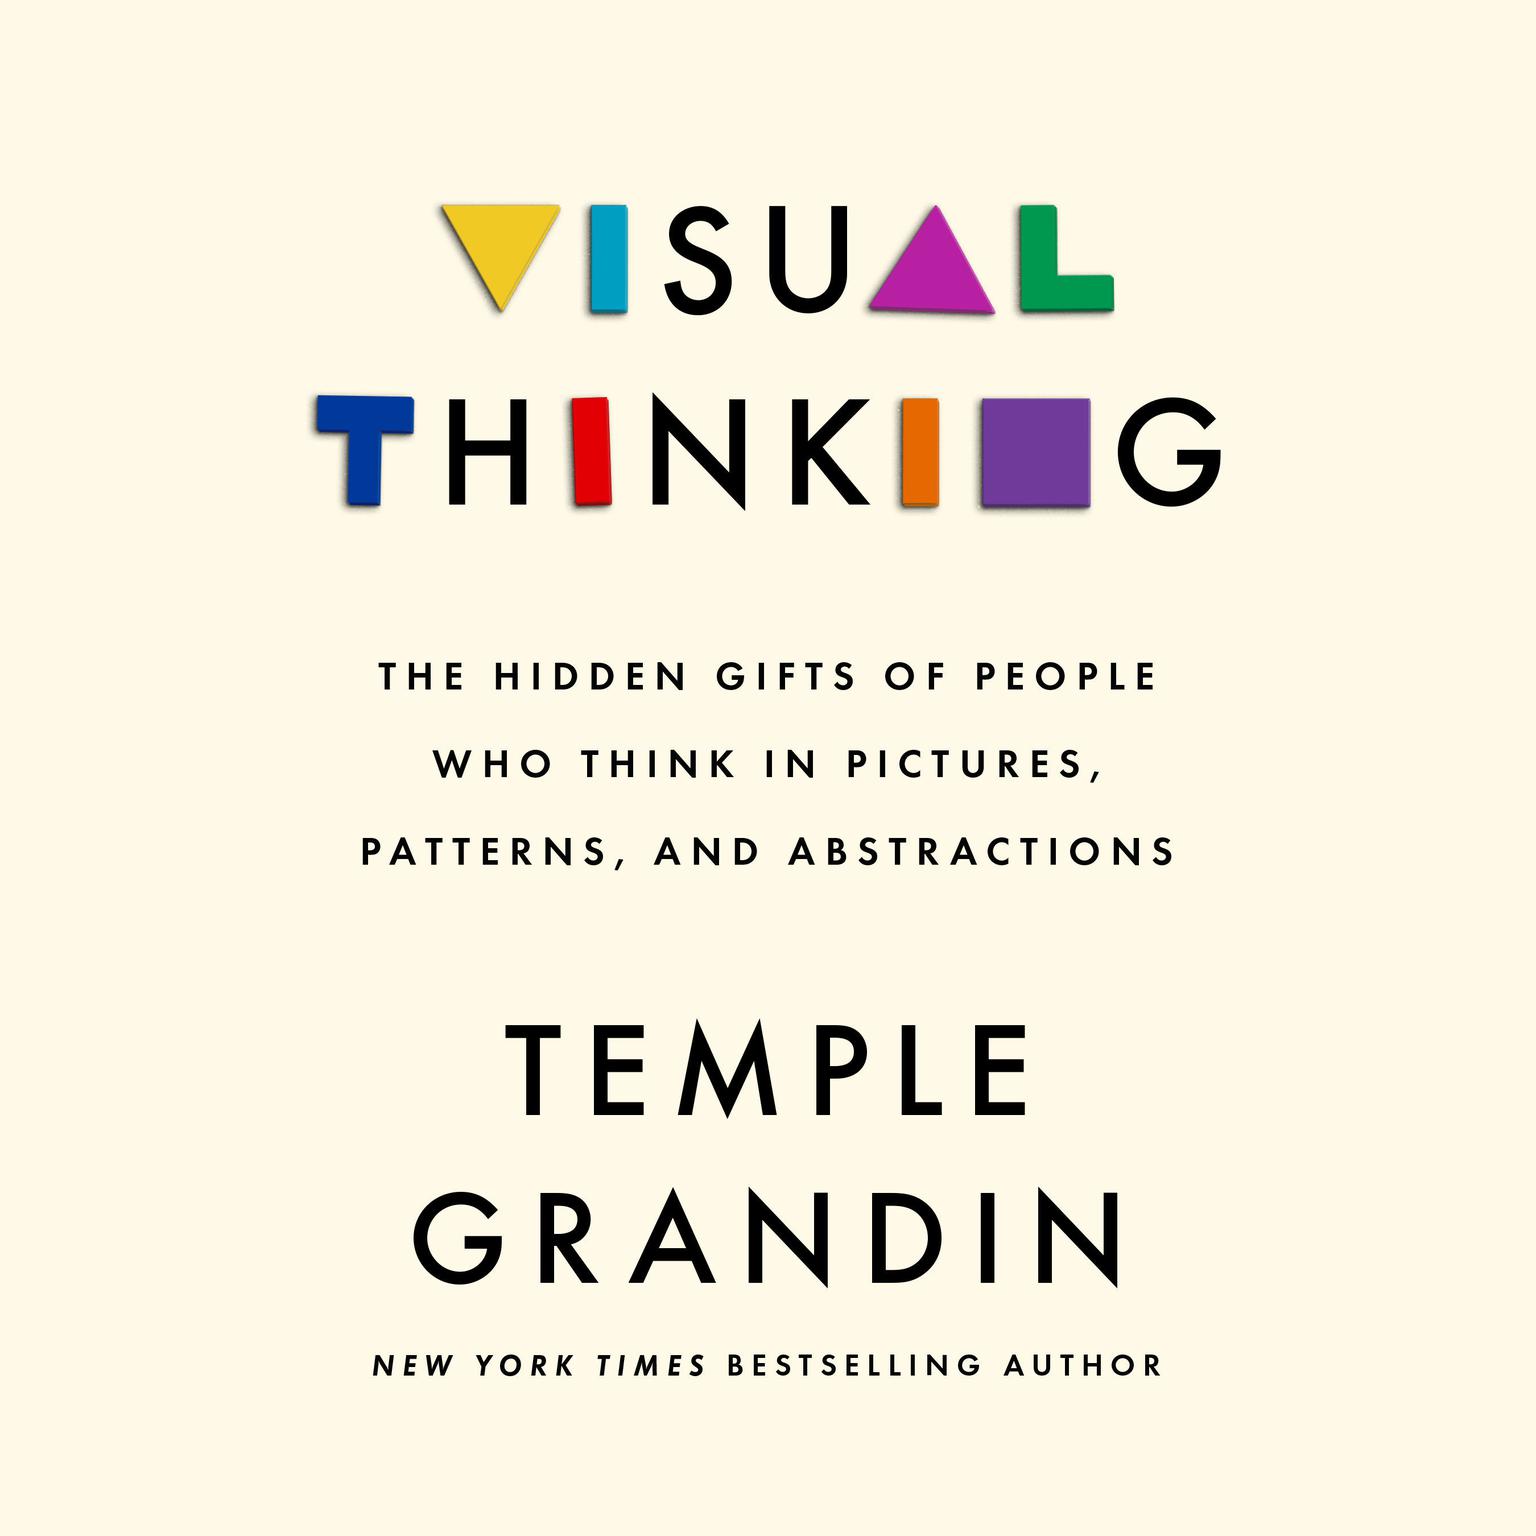 Visual Thinking: The Hidden Gifts of People Who Think in Pictures, Patterns, and Abstractions Audiobook, by Temple Grandin